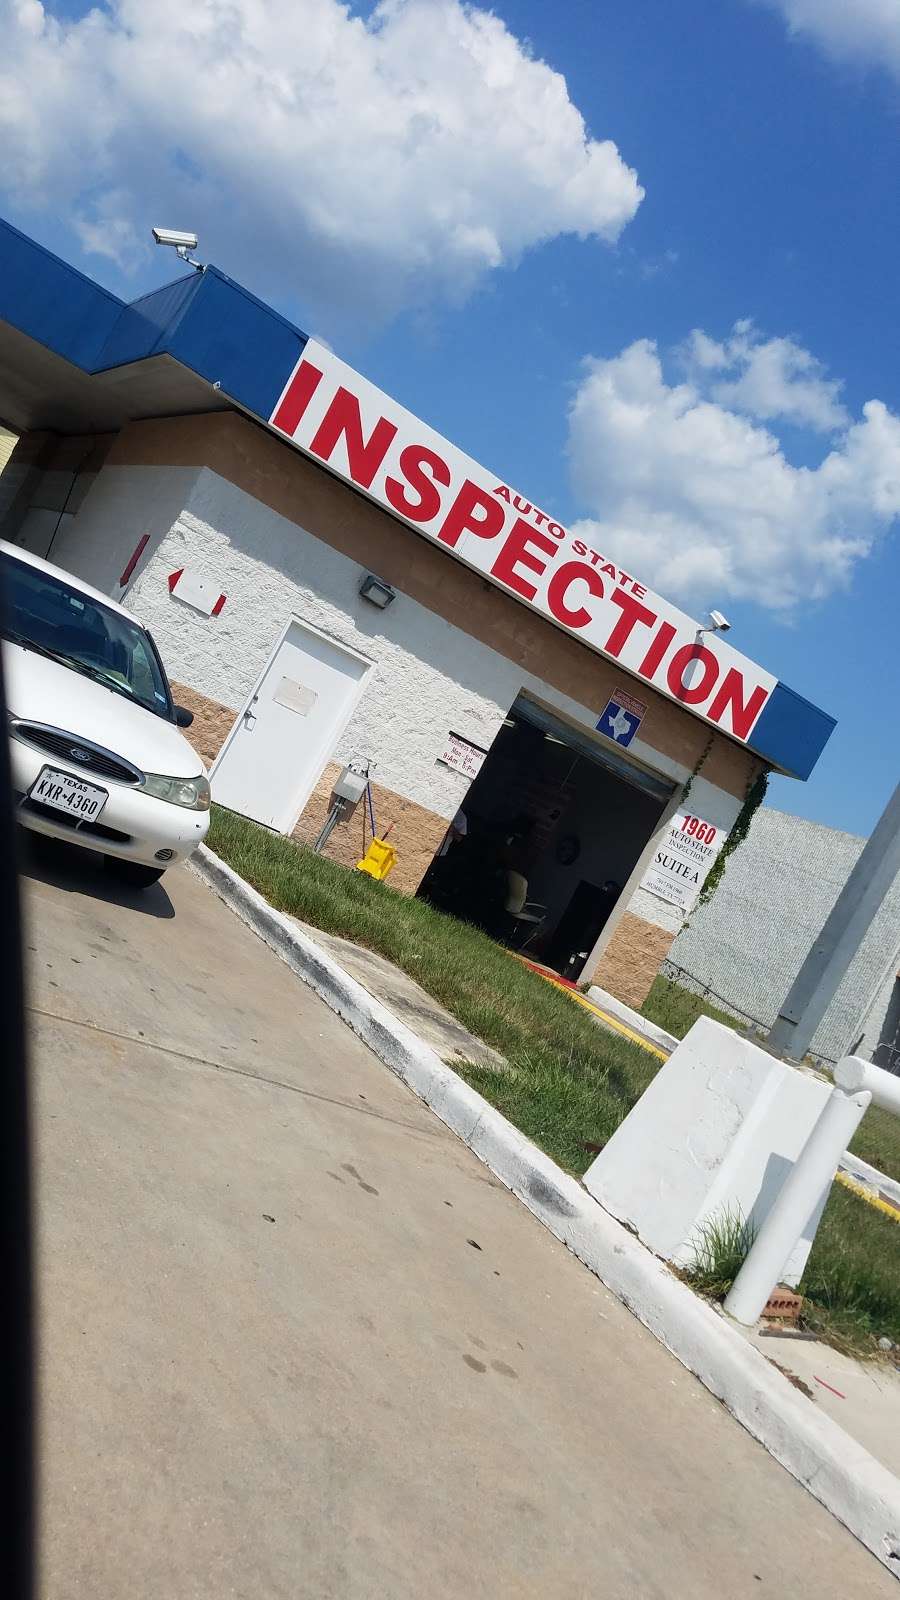 1960 Auto State Inspection | 7017 FM 1960, Humble, TX 77338